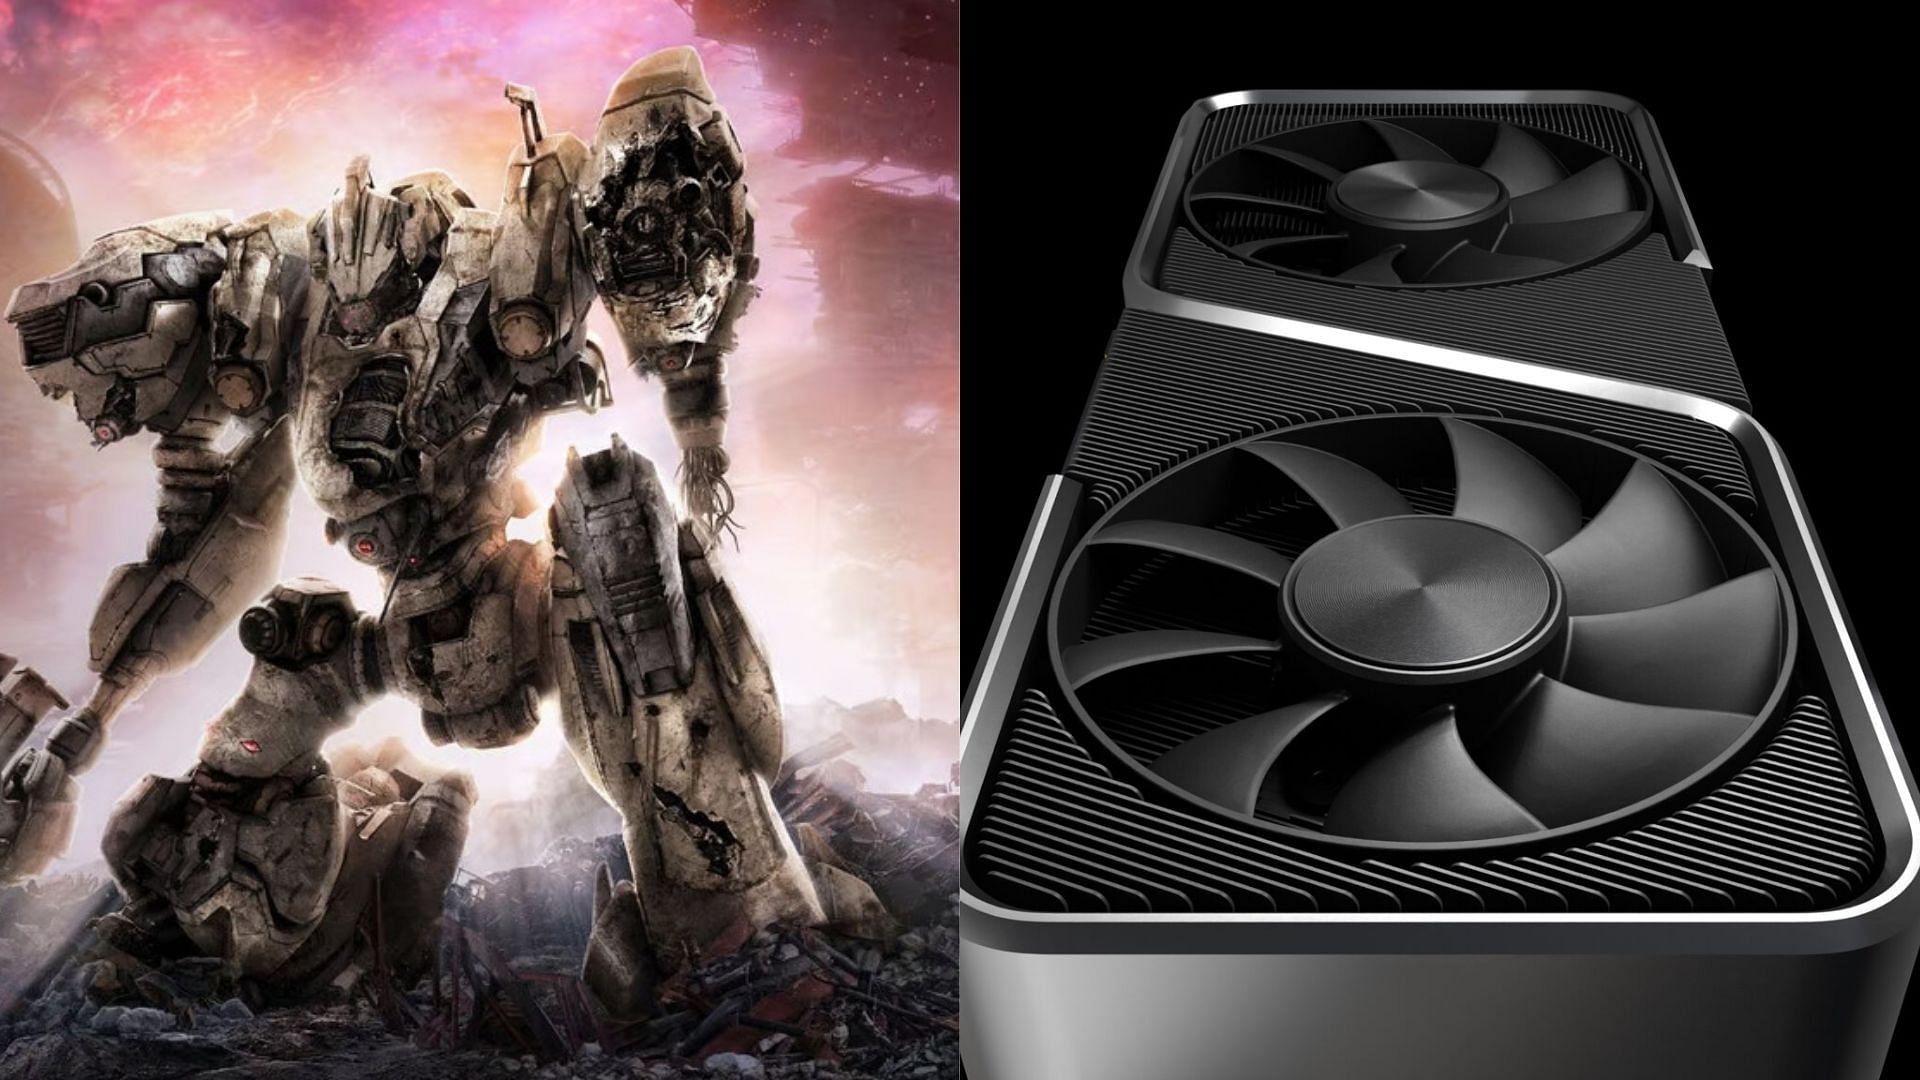 The RTX 3070 and 3070 Ti are superb graphics cards for playing Armored Core 6 (Image via FromSoftware and Nvidia)